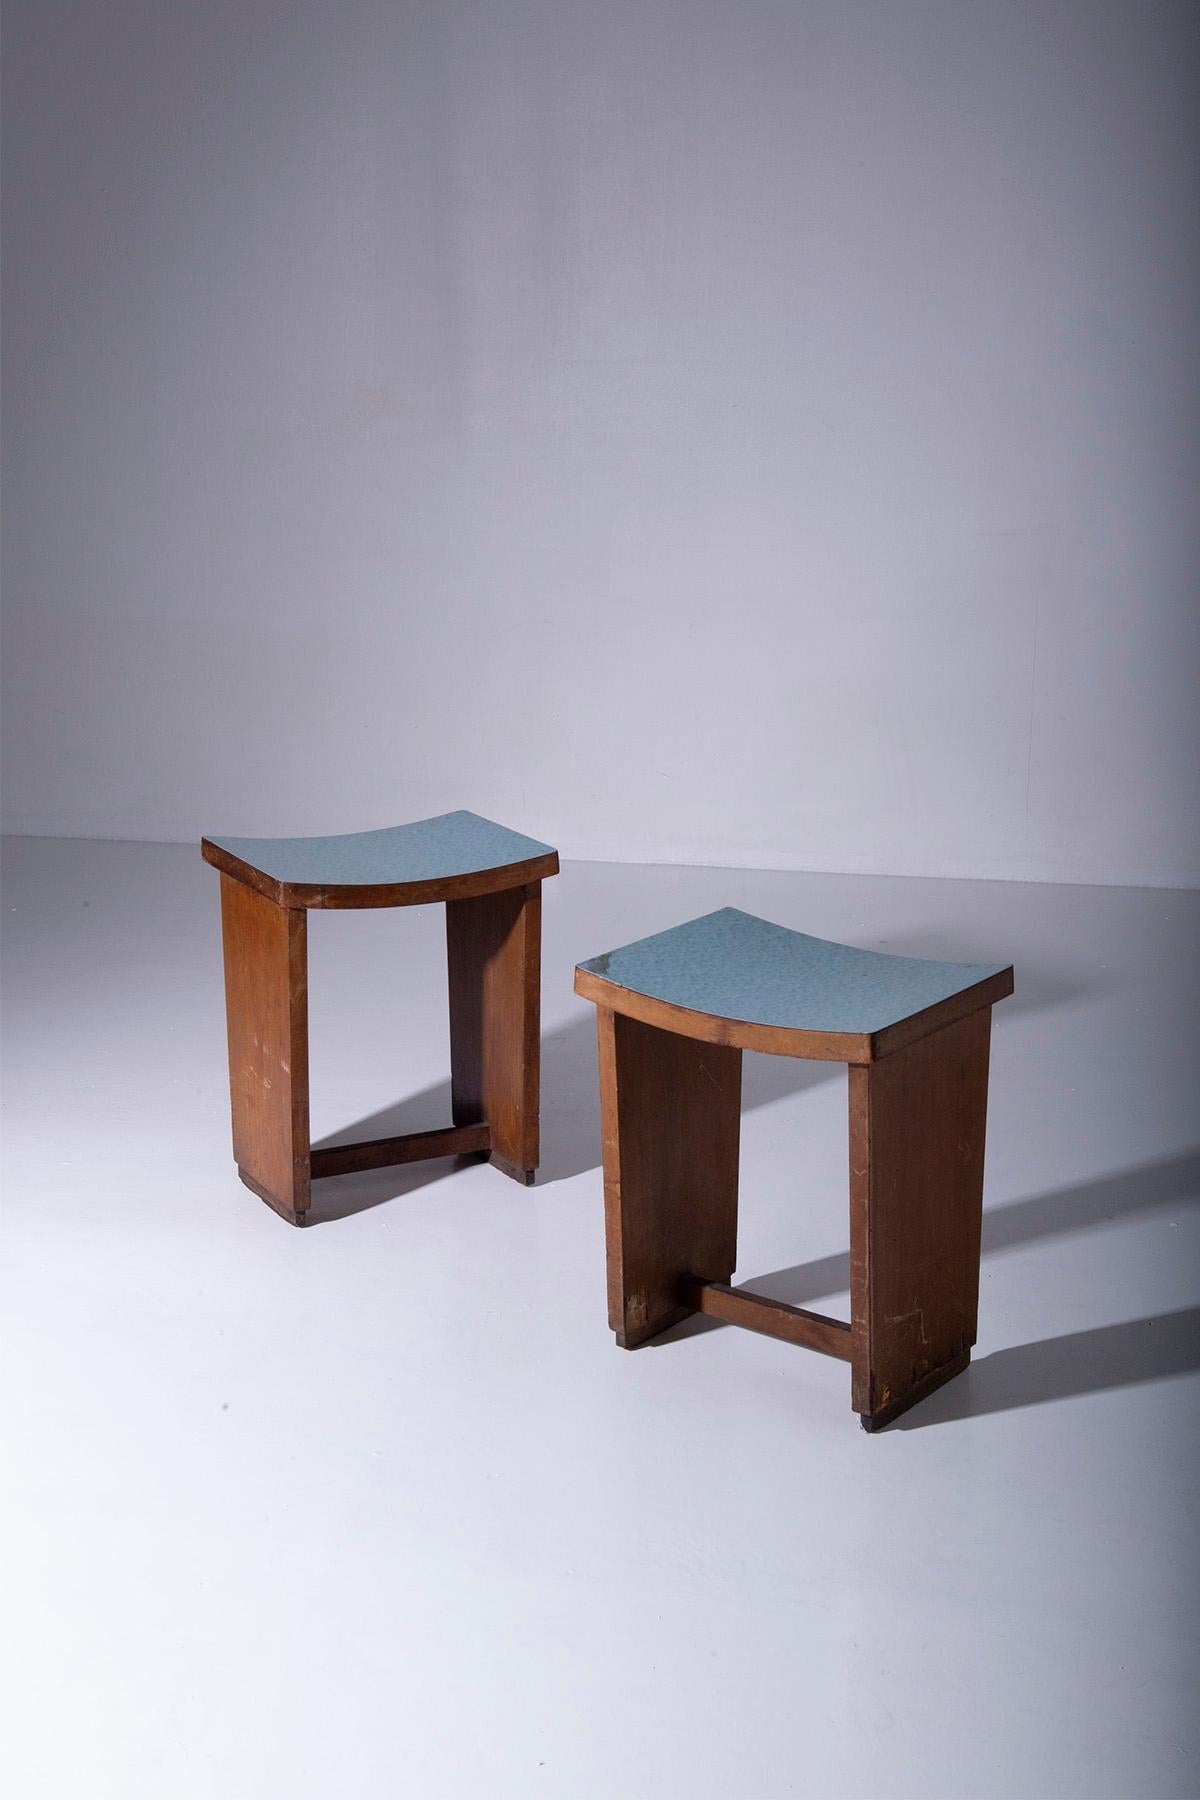 Imagine a pair of Italian rationalist stools, frozen in time from a bygone era. These stools are more than just furniture; they are a testament to a design movement that celebrated precision, simplicity, and functionality.

The first thing that